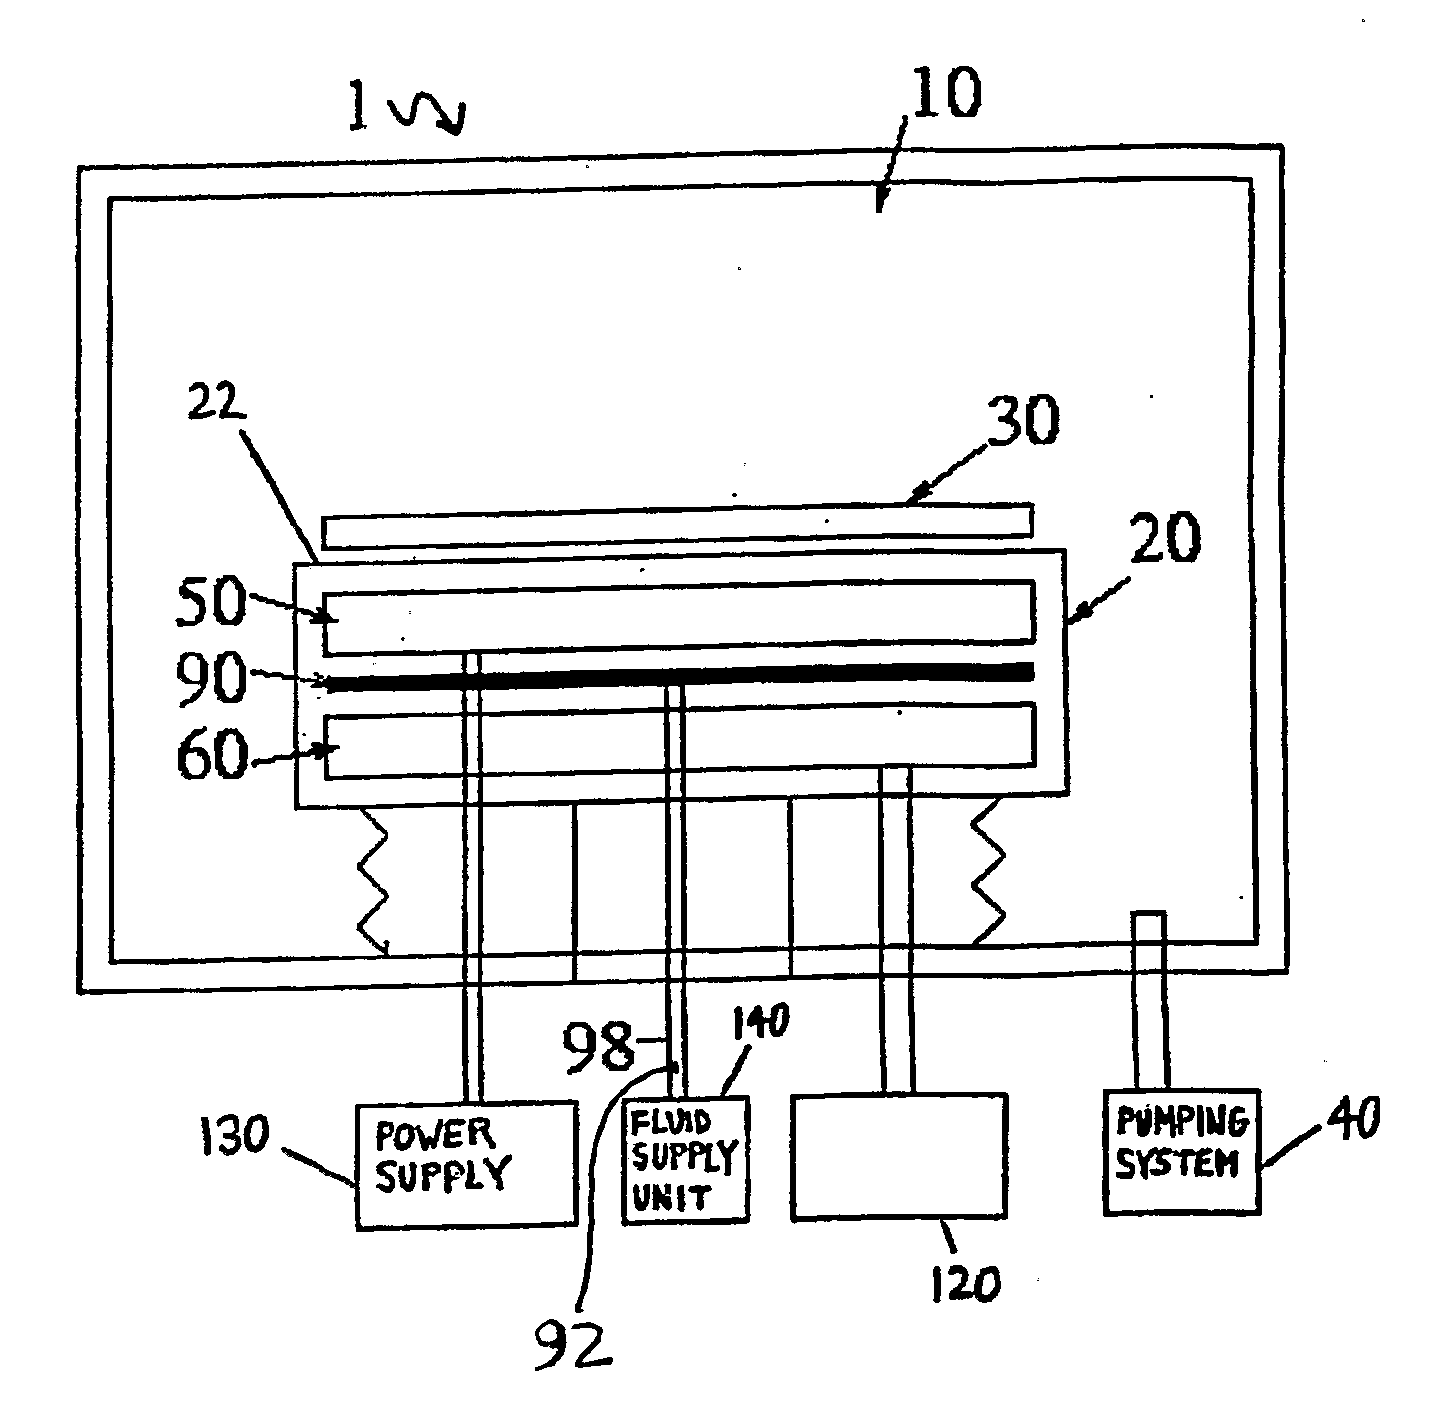 Substrate Holder Having a Fluid Gap and Method of Fabricating the Substrate Holder